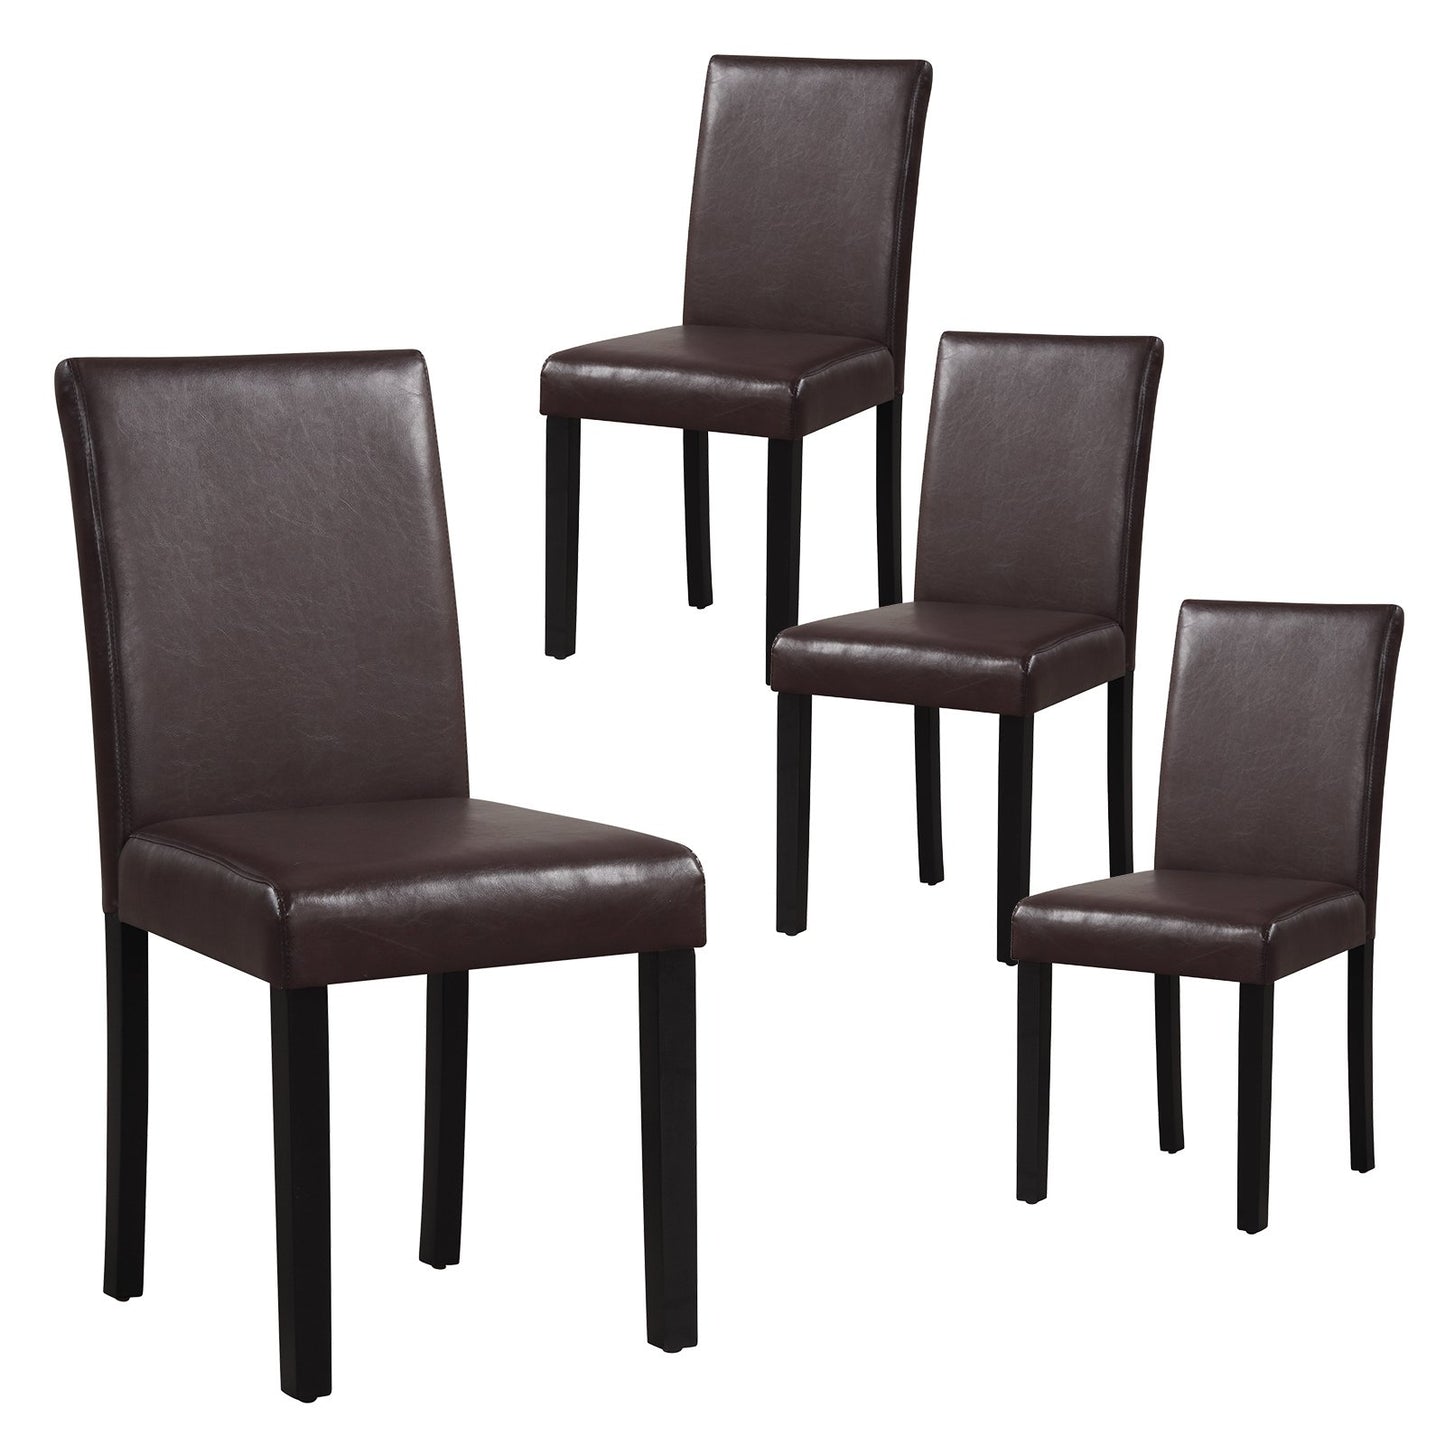 Dining Chair Set of 4 Upholstered Kitchen Dinette Chairs with Wood Frame, Brown